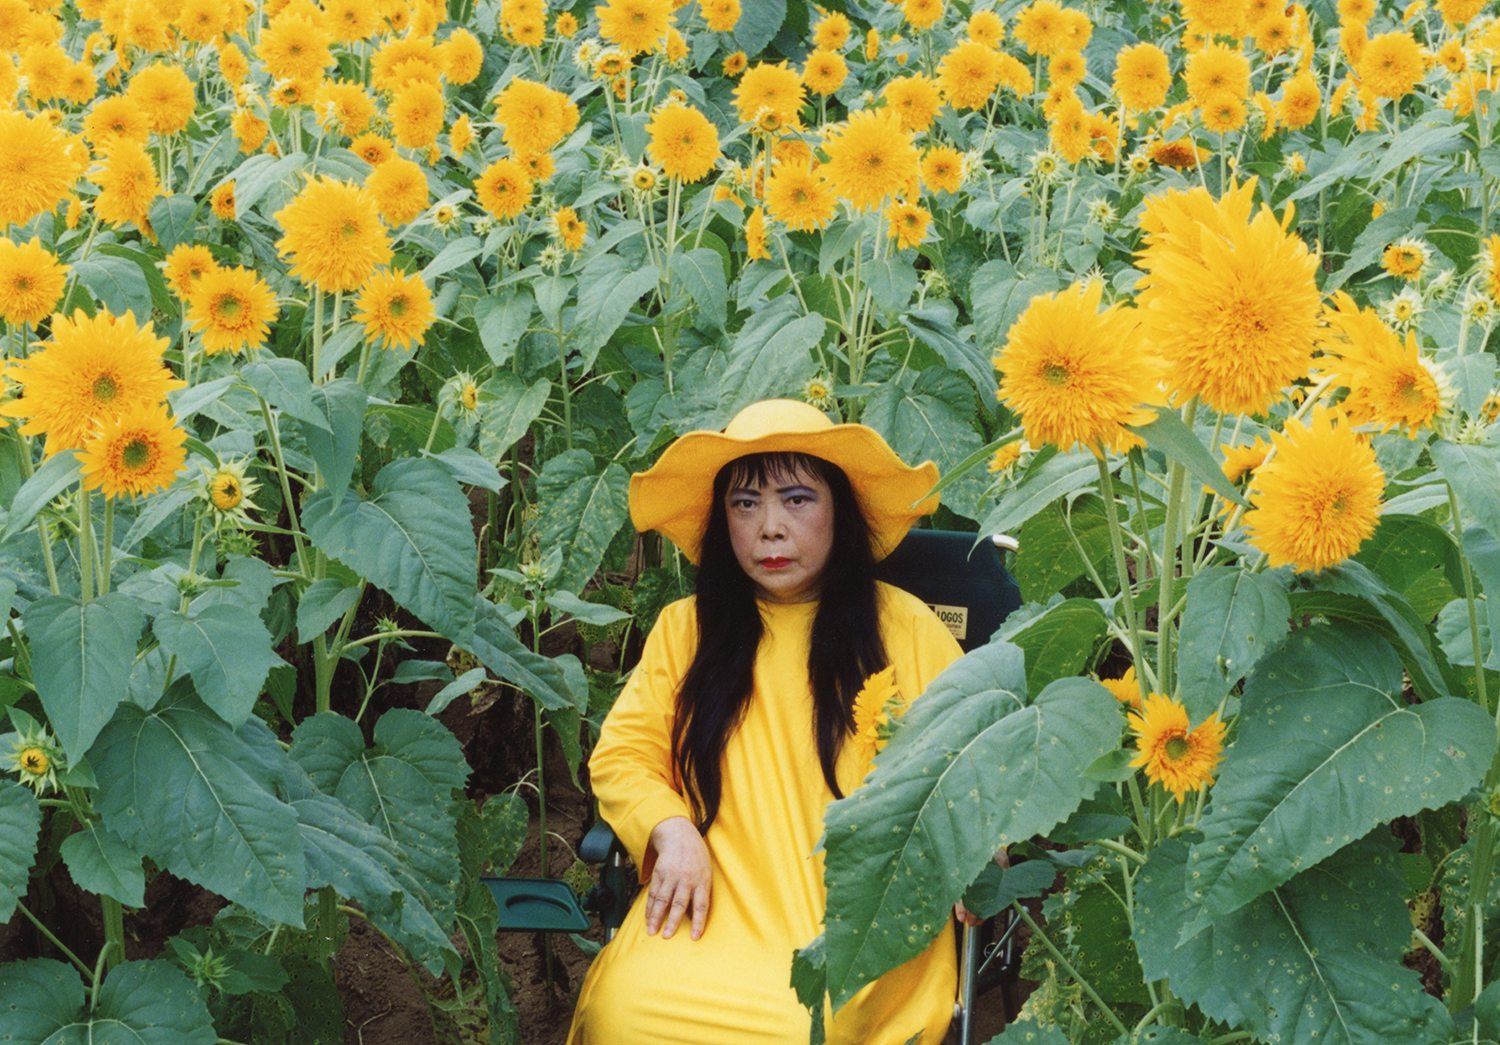 Yayoi Kusama, “Flower Obsession (Sunflower)”, Video Still, Collection of the artist